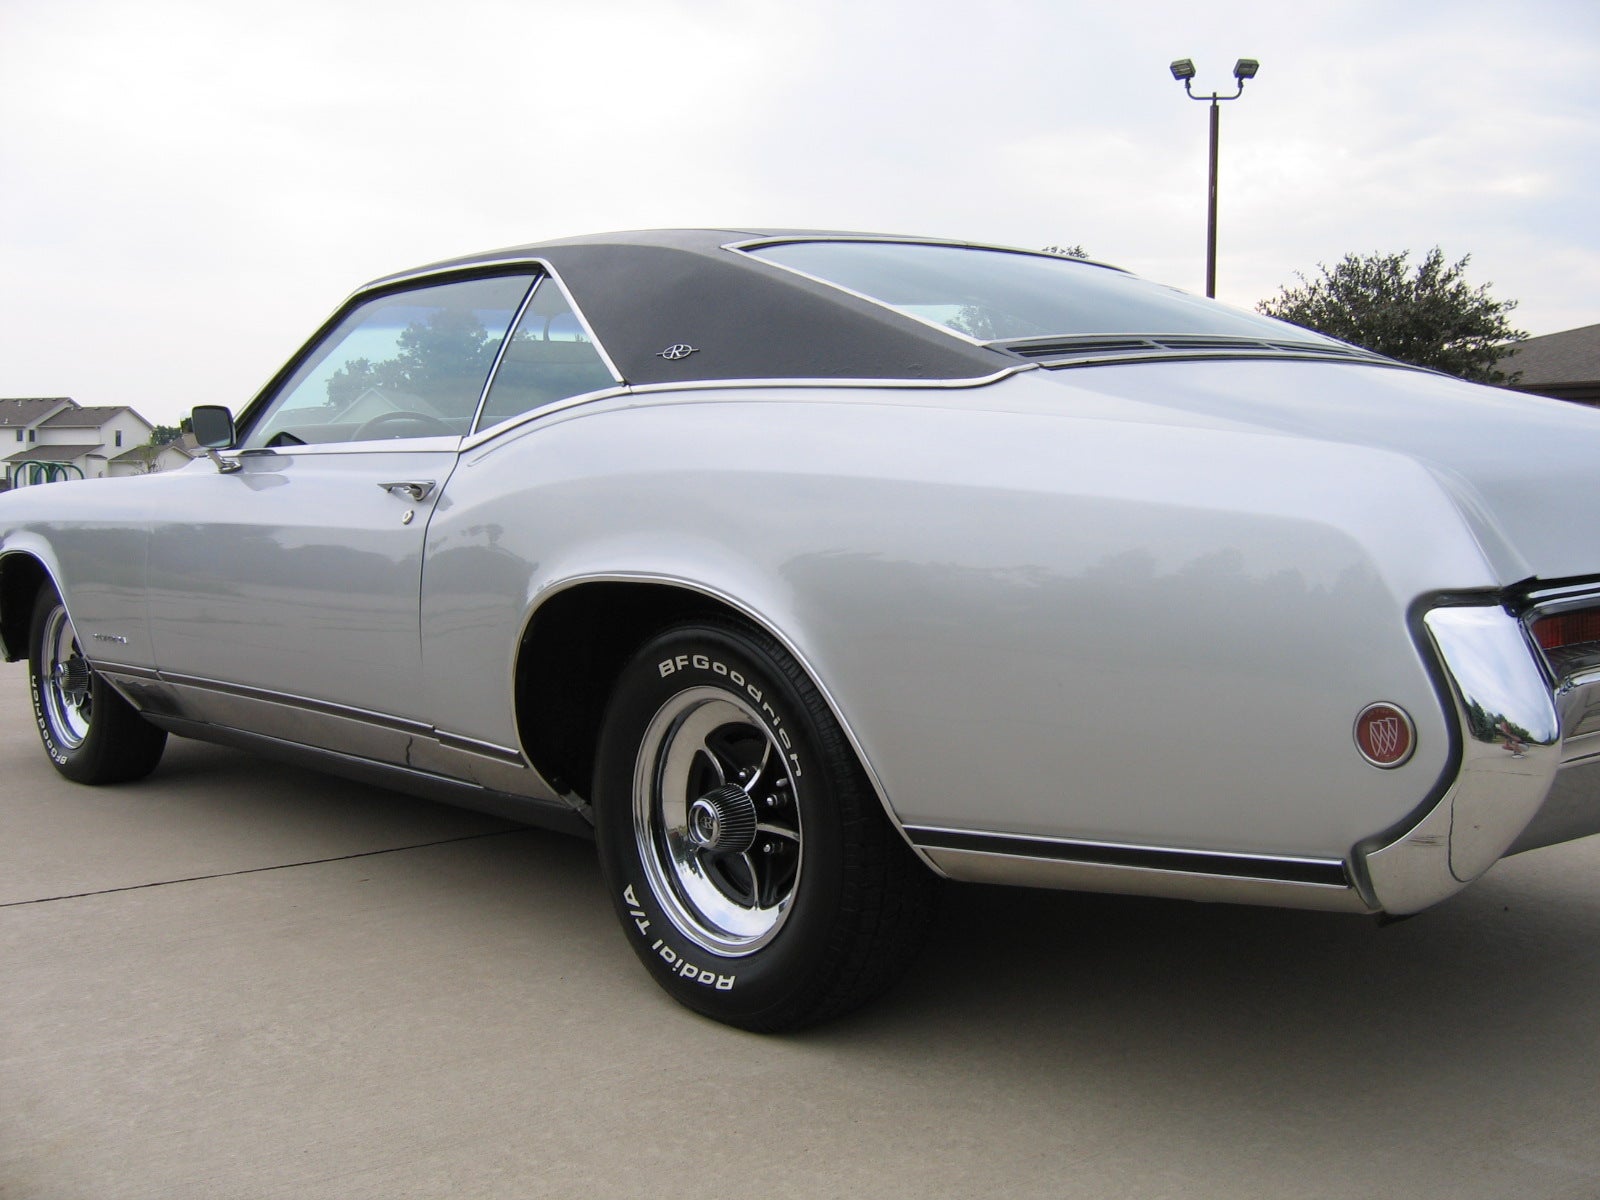 1968 Buick Riviera - Pictures - Picture of 1968 Buick Riviera ...